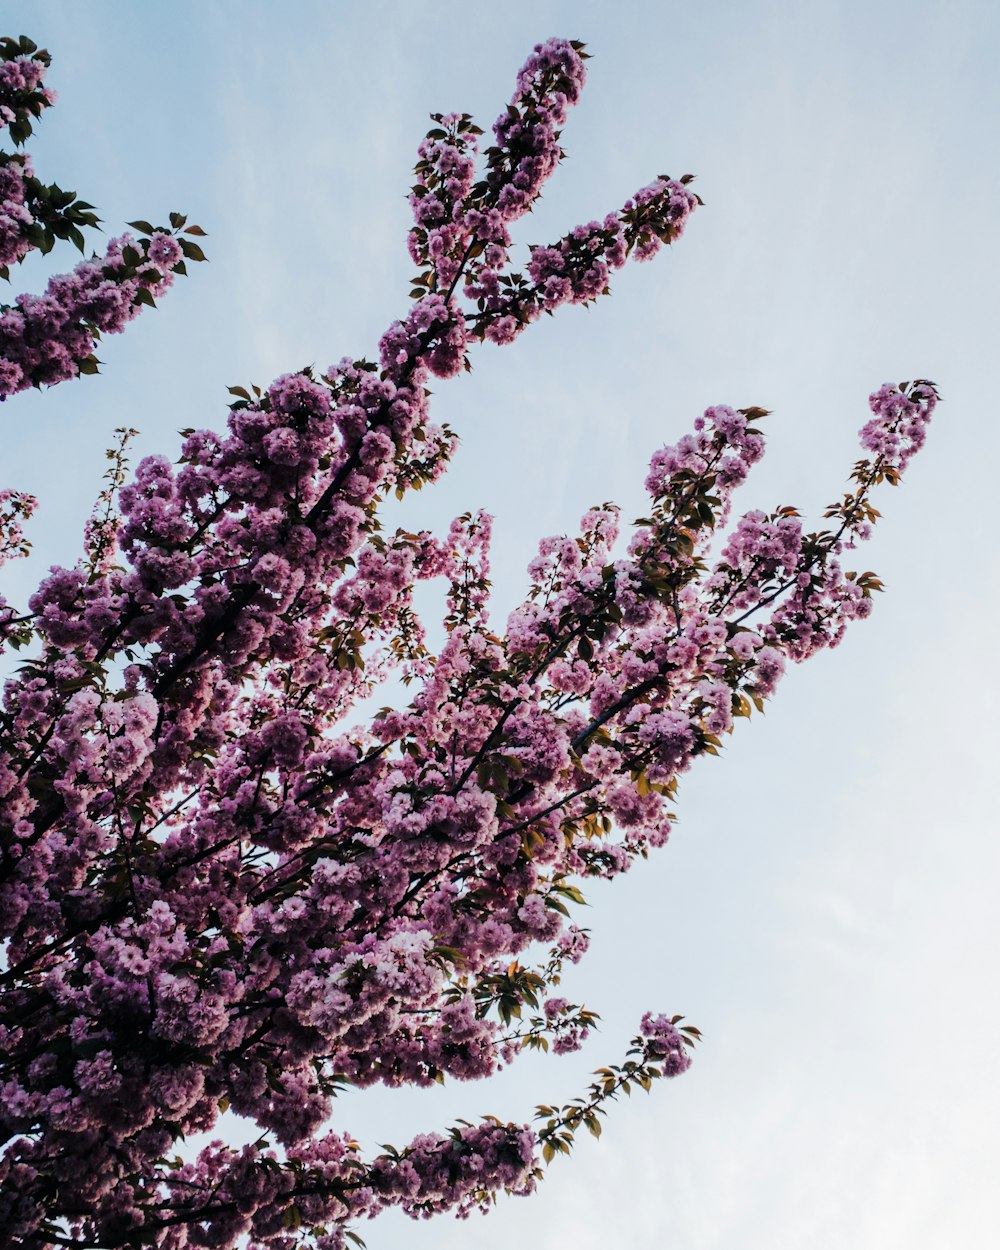 a tree with purple flowers in front of a blue sky